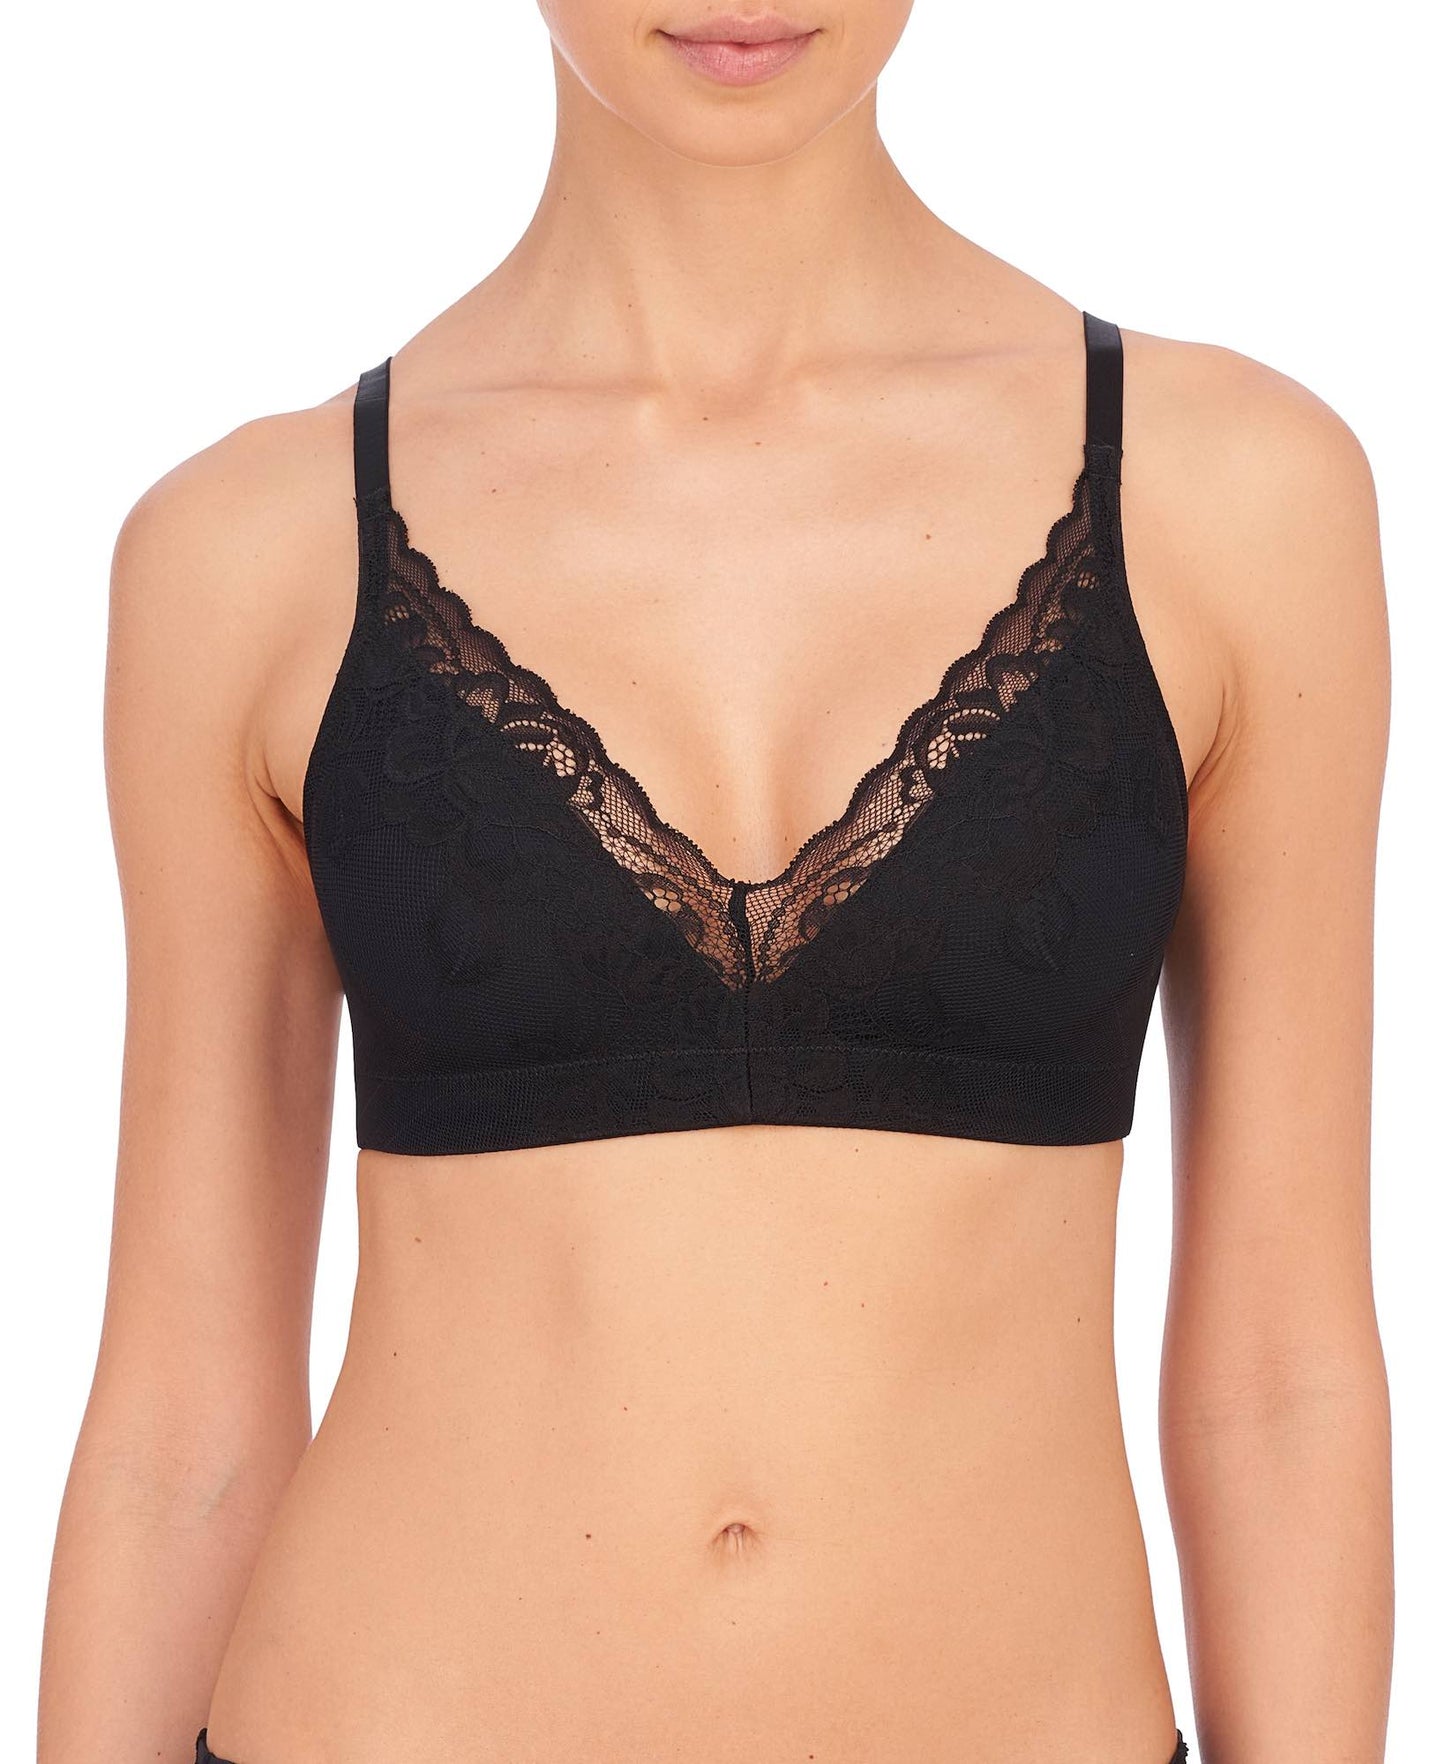 Avail Full Fit convertible bralette